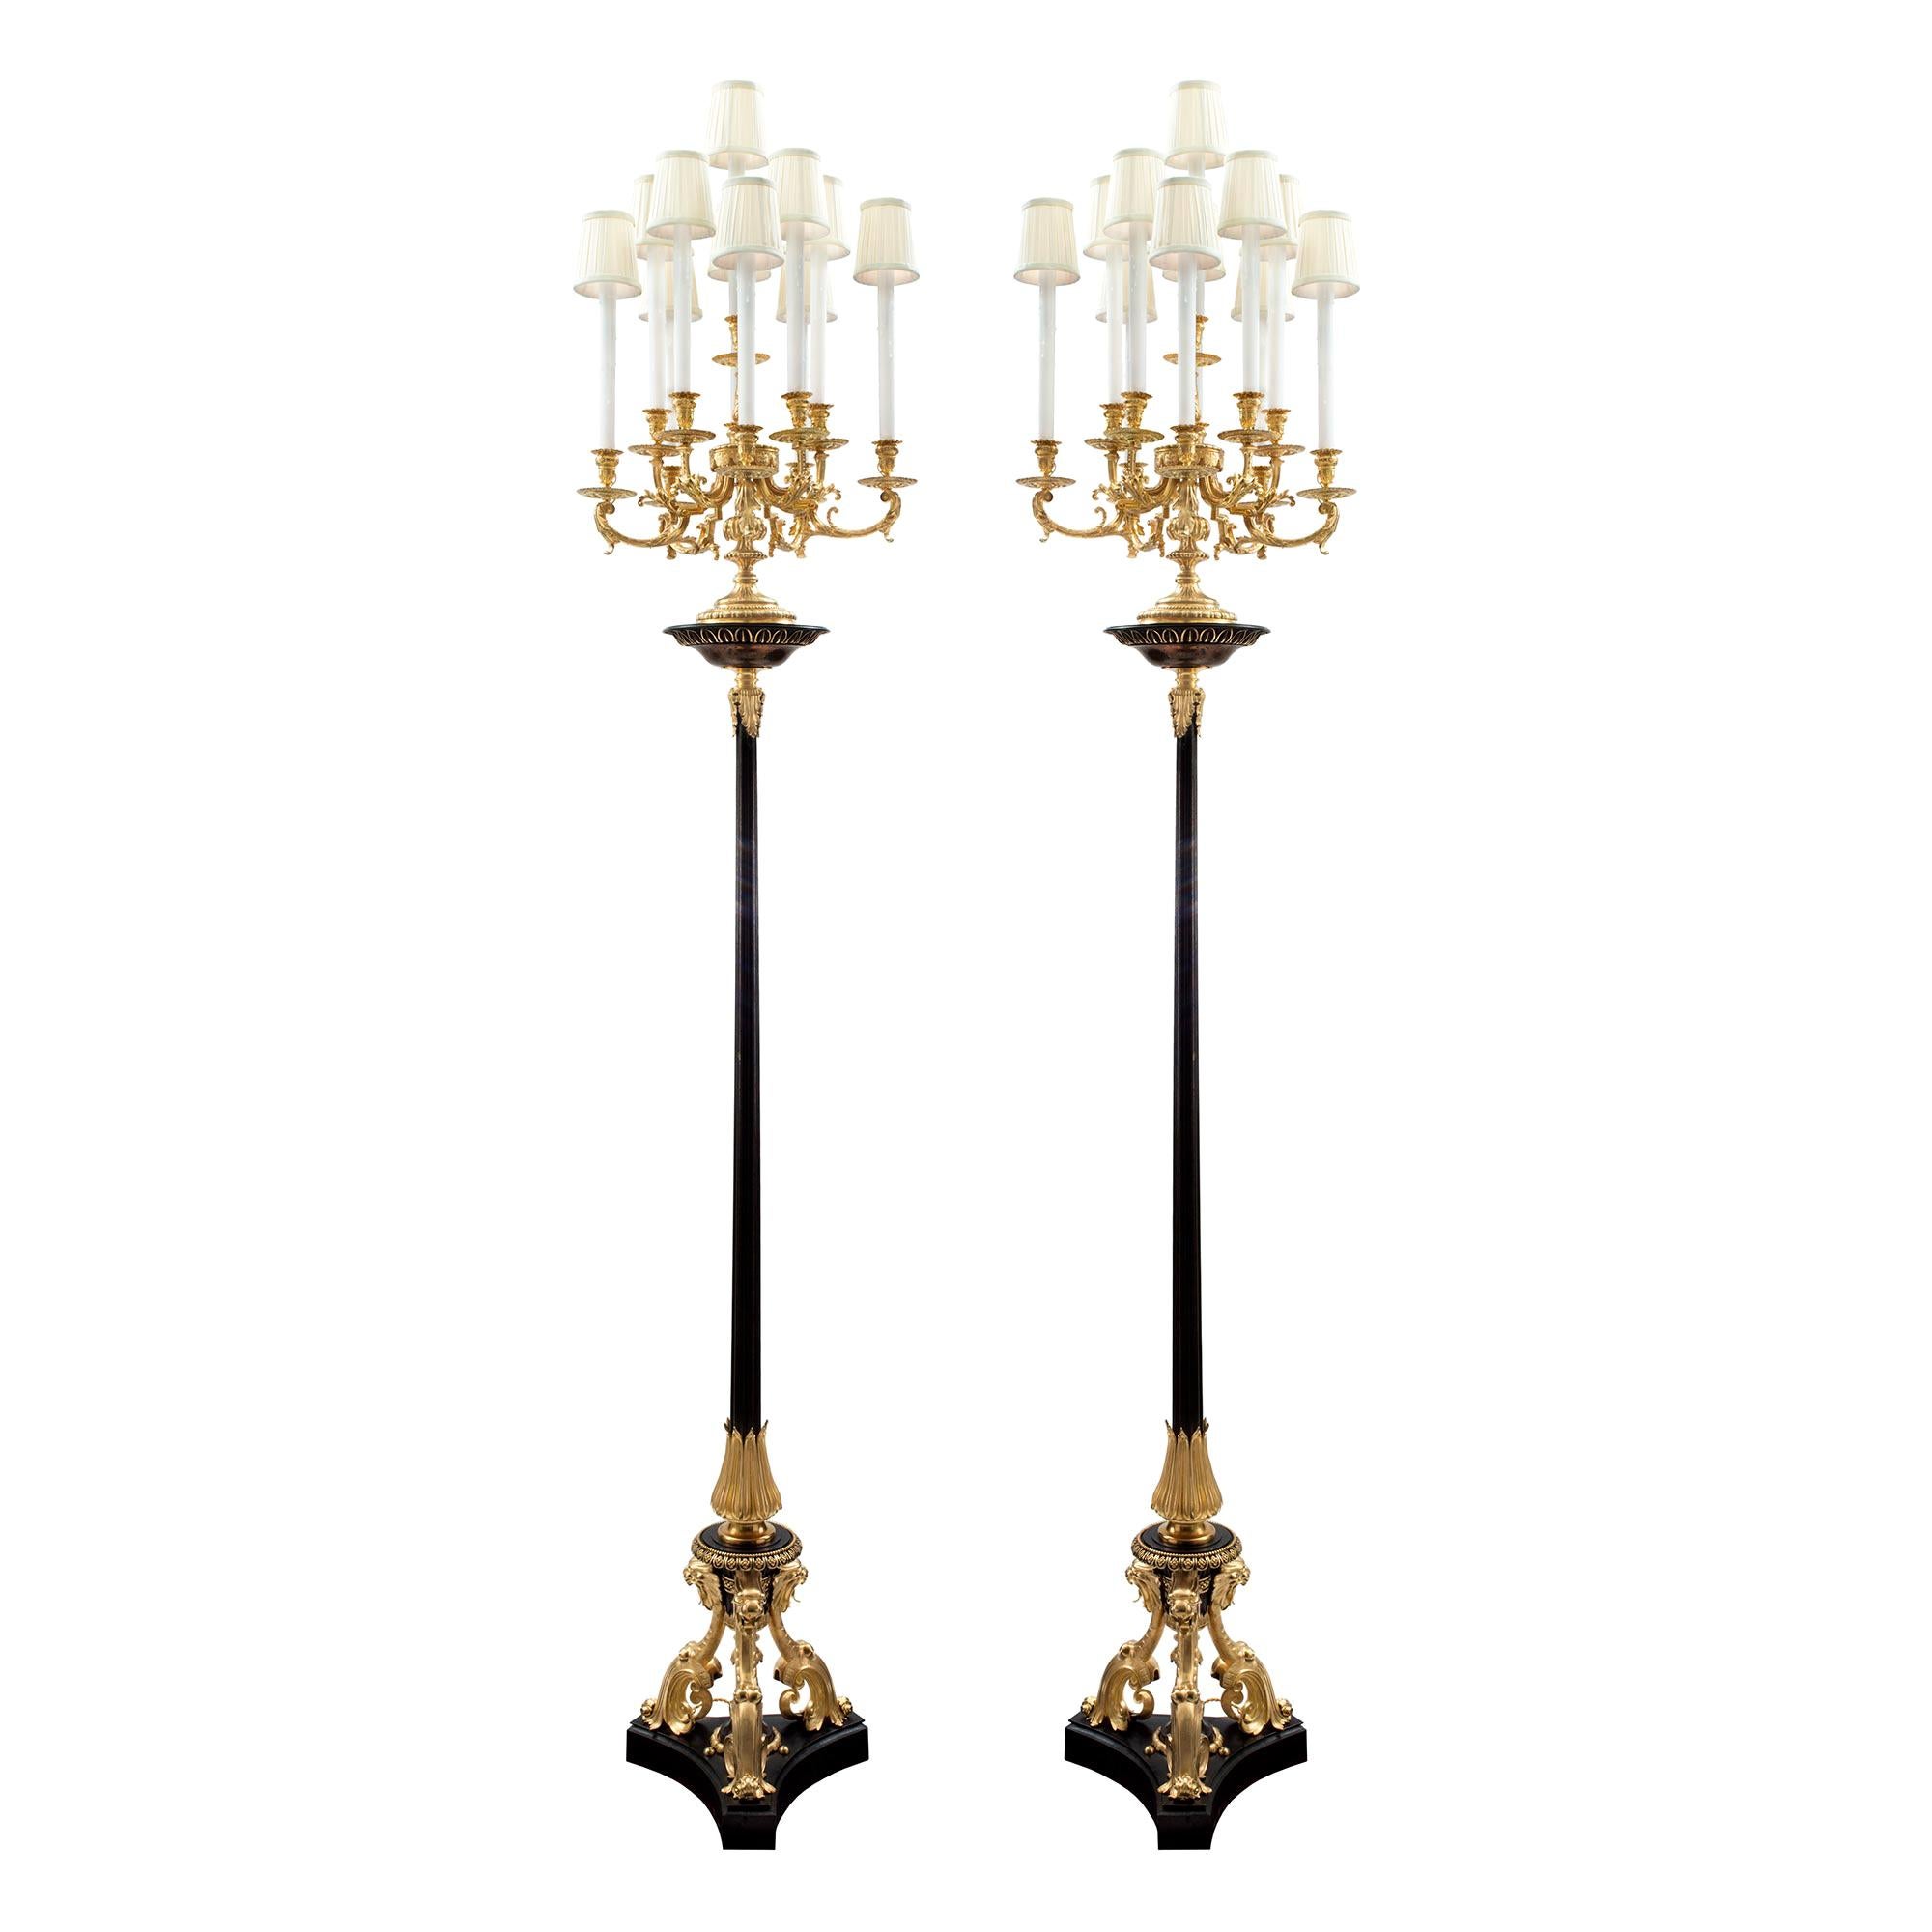 Pair of French 19th Century Renaissance Style Ormolu and Bronze Torchières